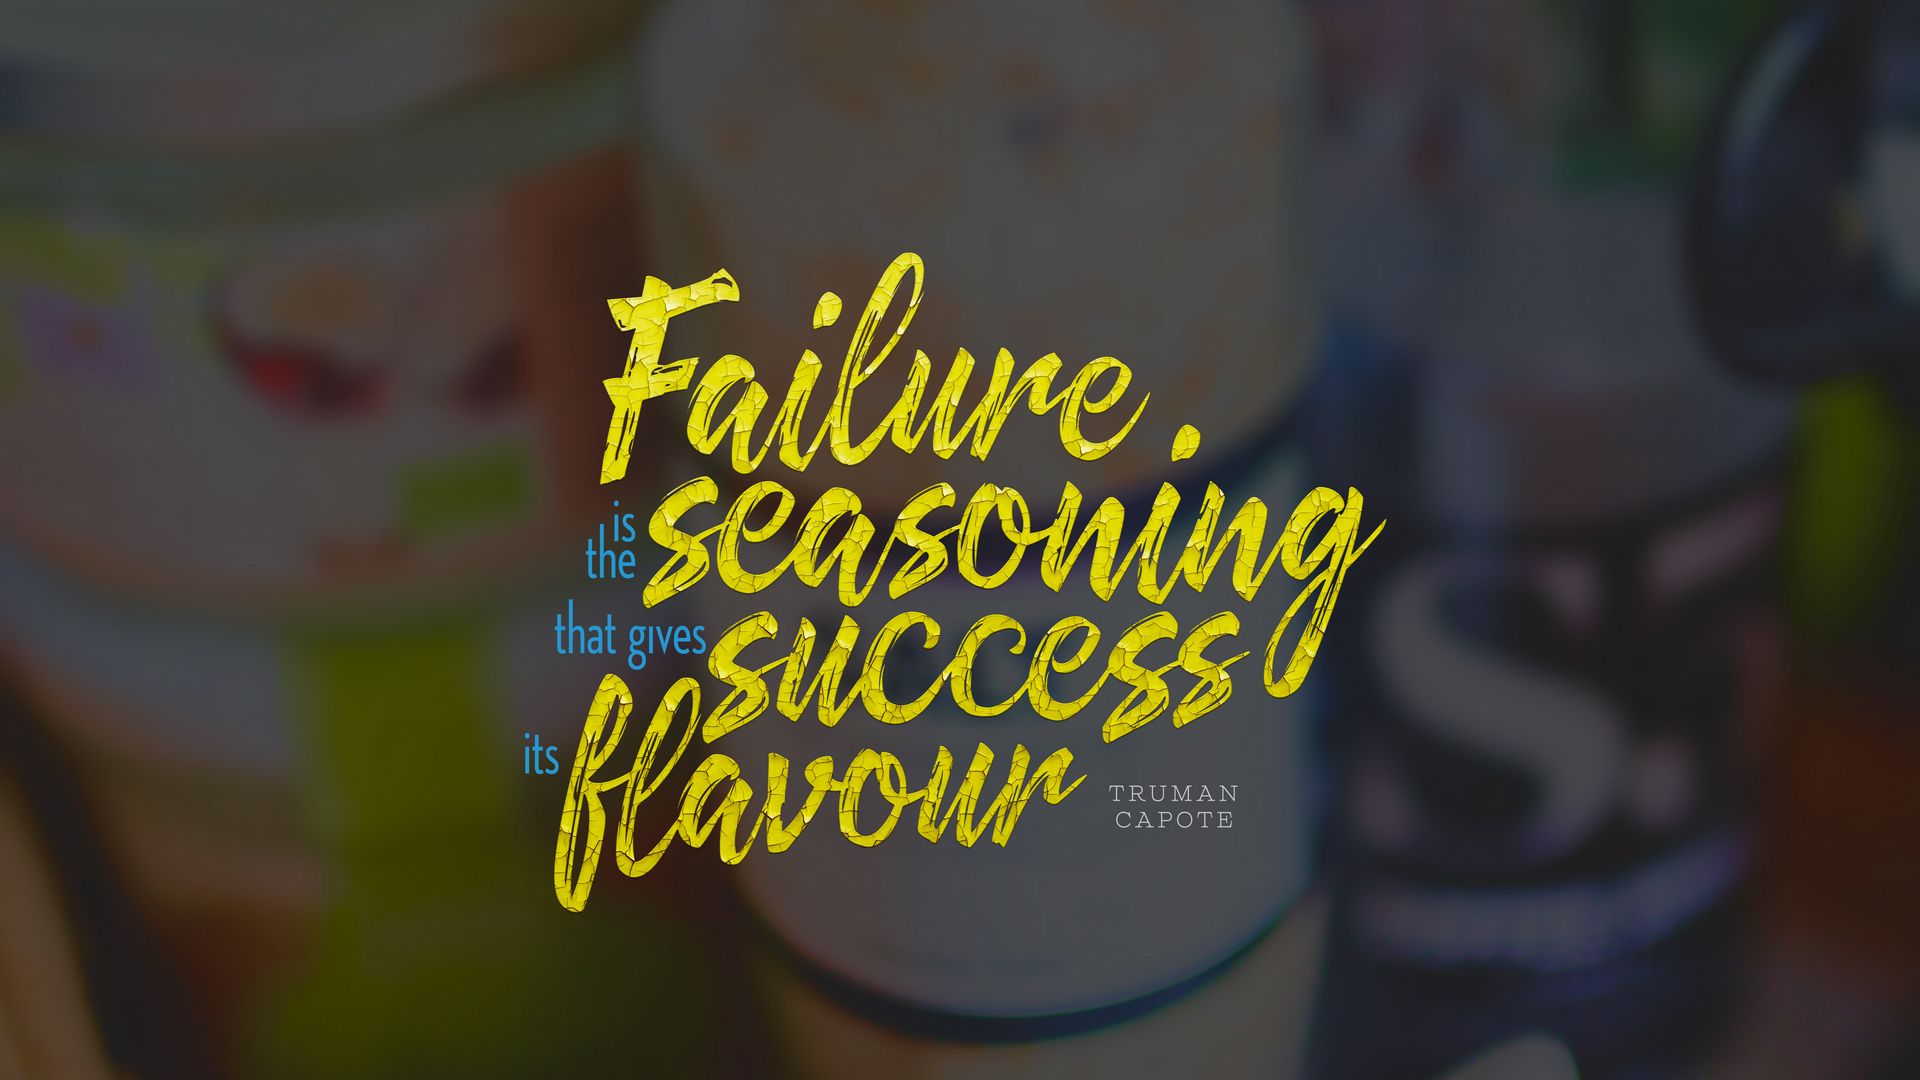 Download wallpaper 1920x1080 quote, motivation, inspiration, failure, luck,  success full hd, hdtv, fhd, 1080p hd background